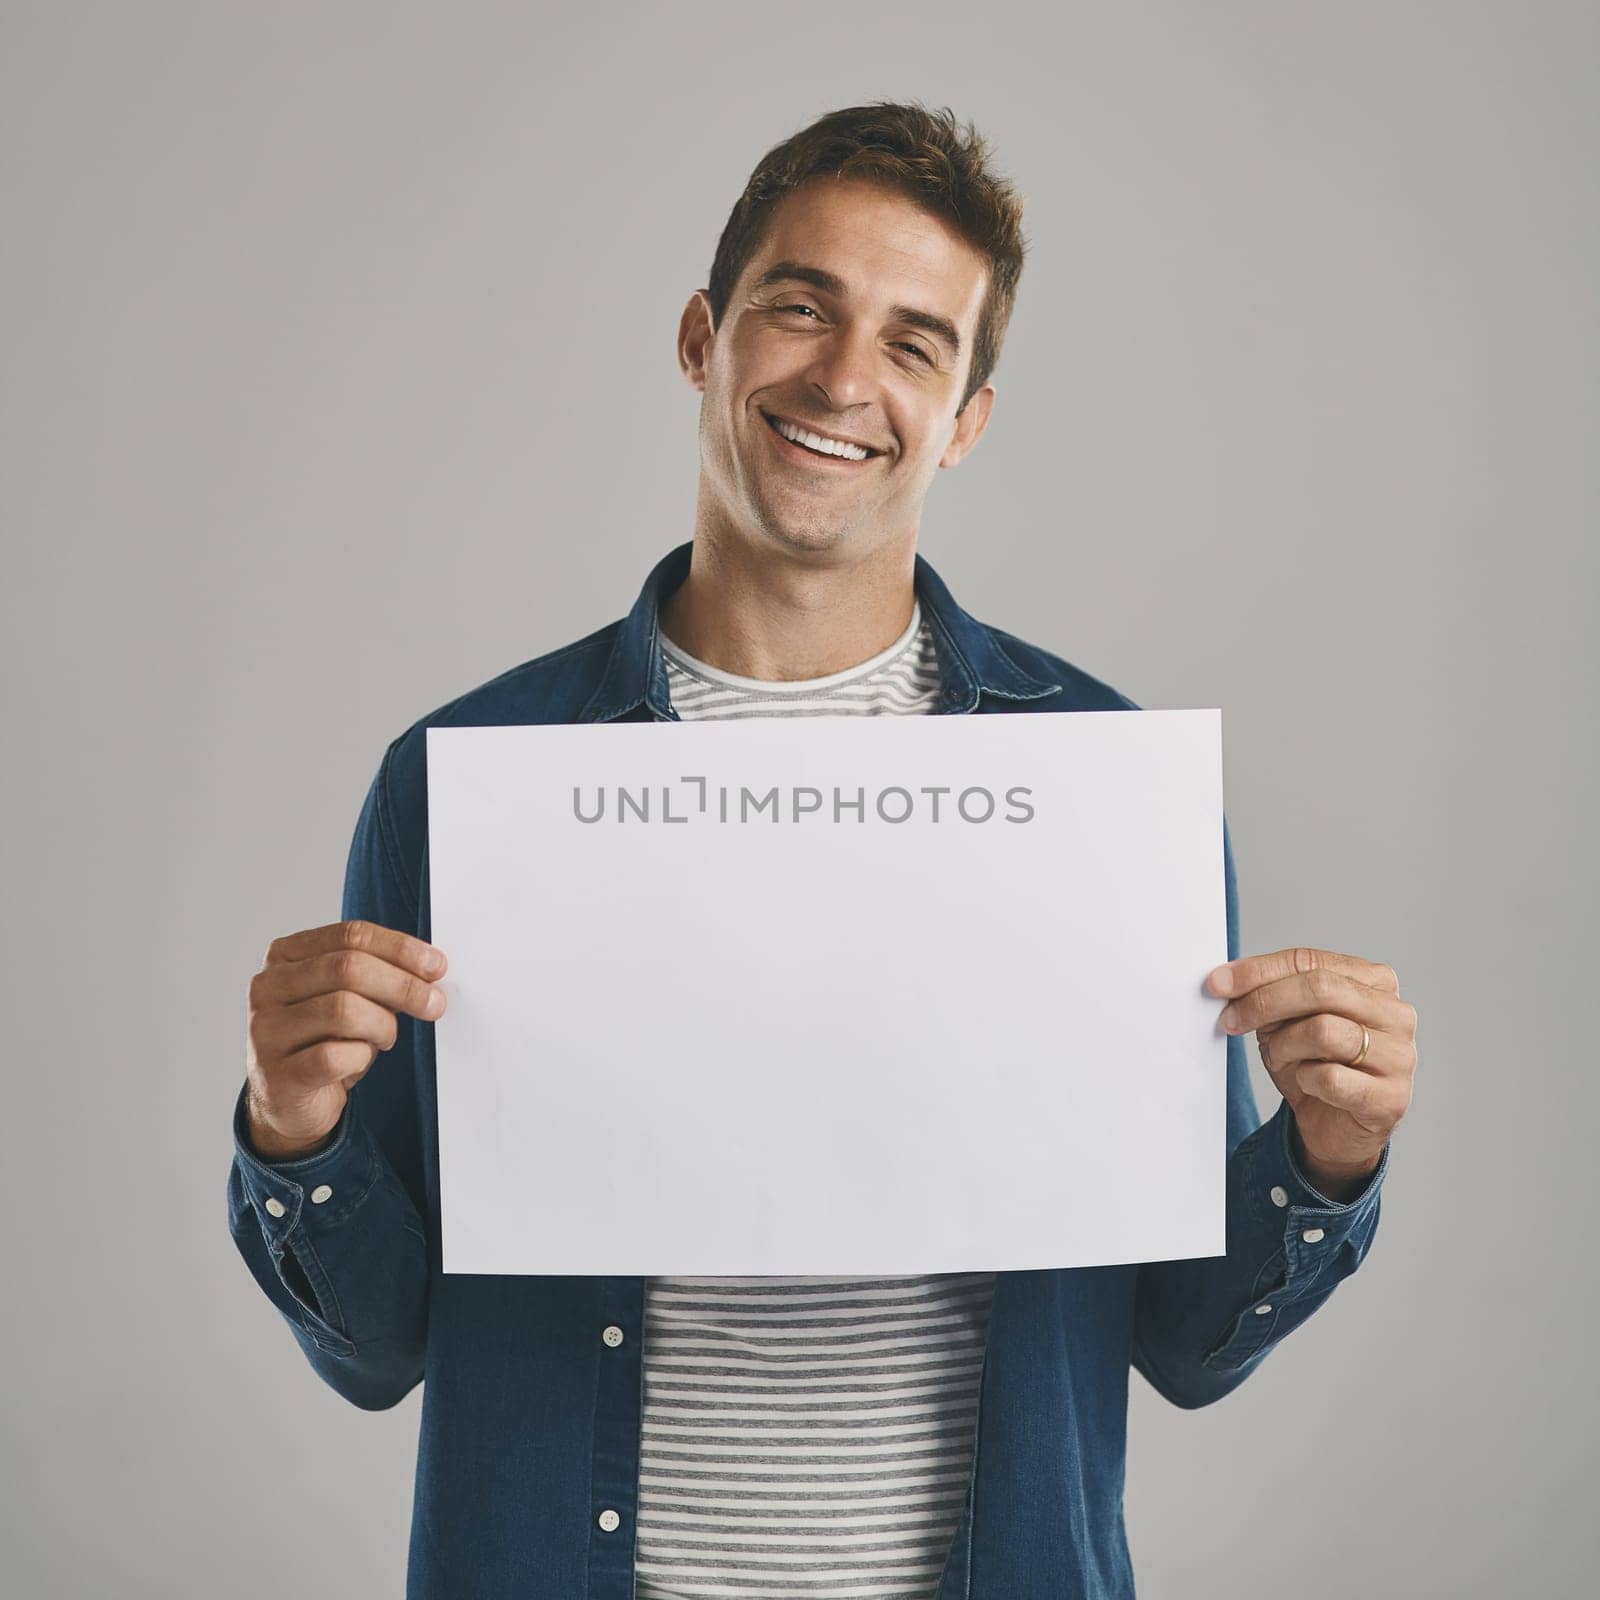 Its time to tell your story. Studio portrait of a young man holding a blank placard against a grey background